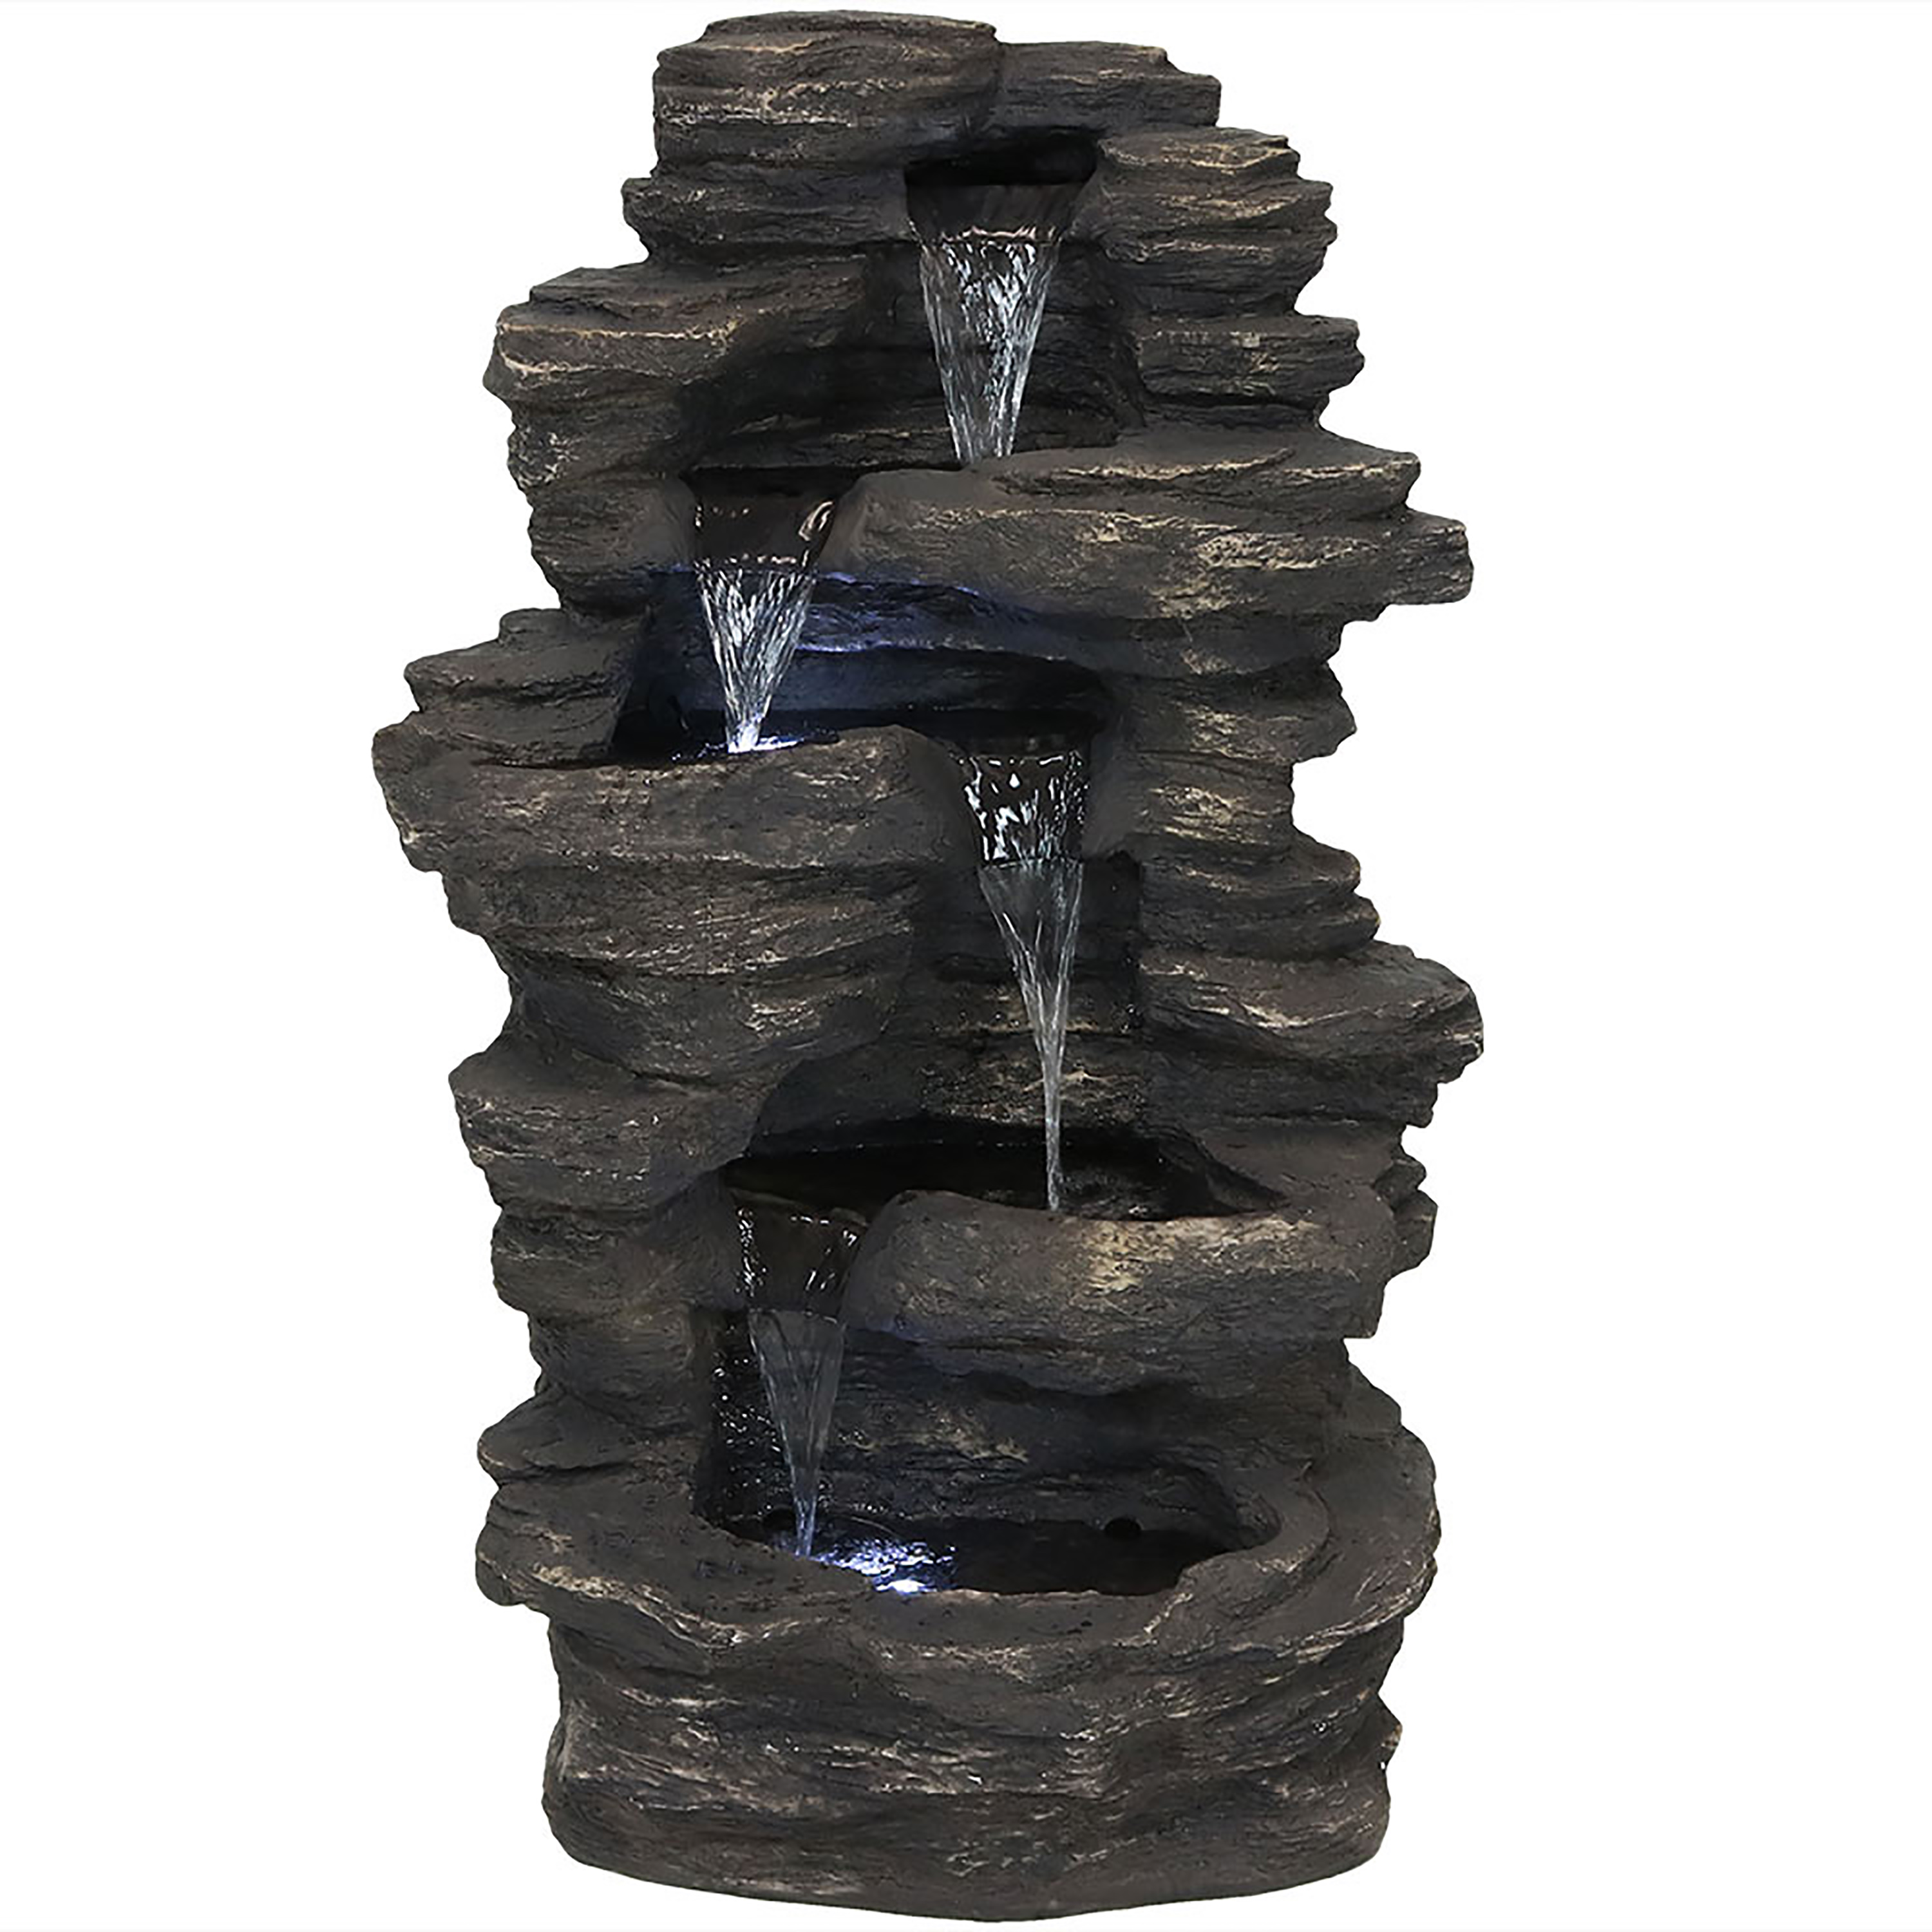 Sunnydaze Rock Falls Electric Waterfall Fountain with LED Lights - 39-Inch